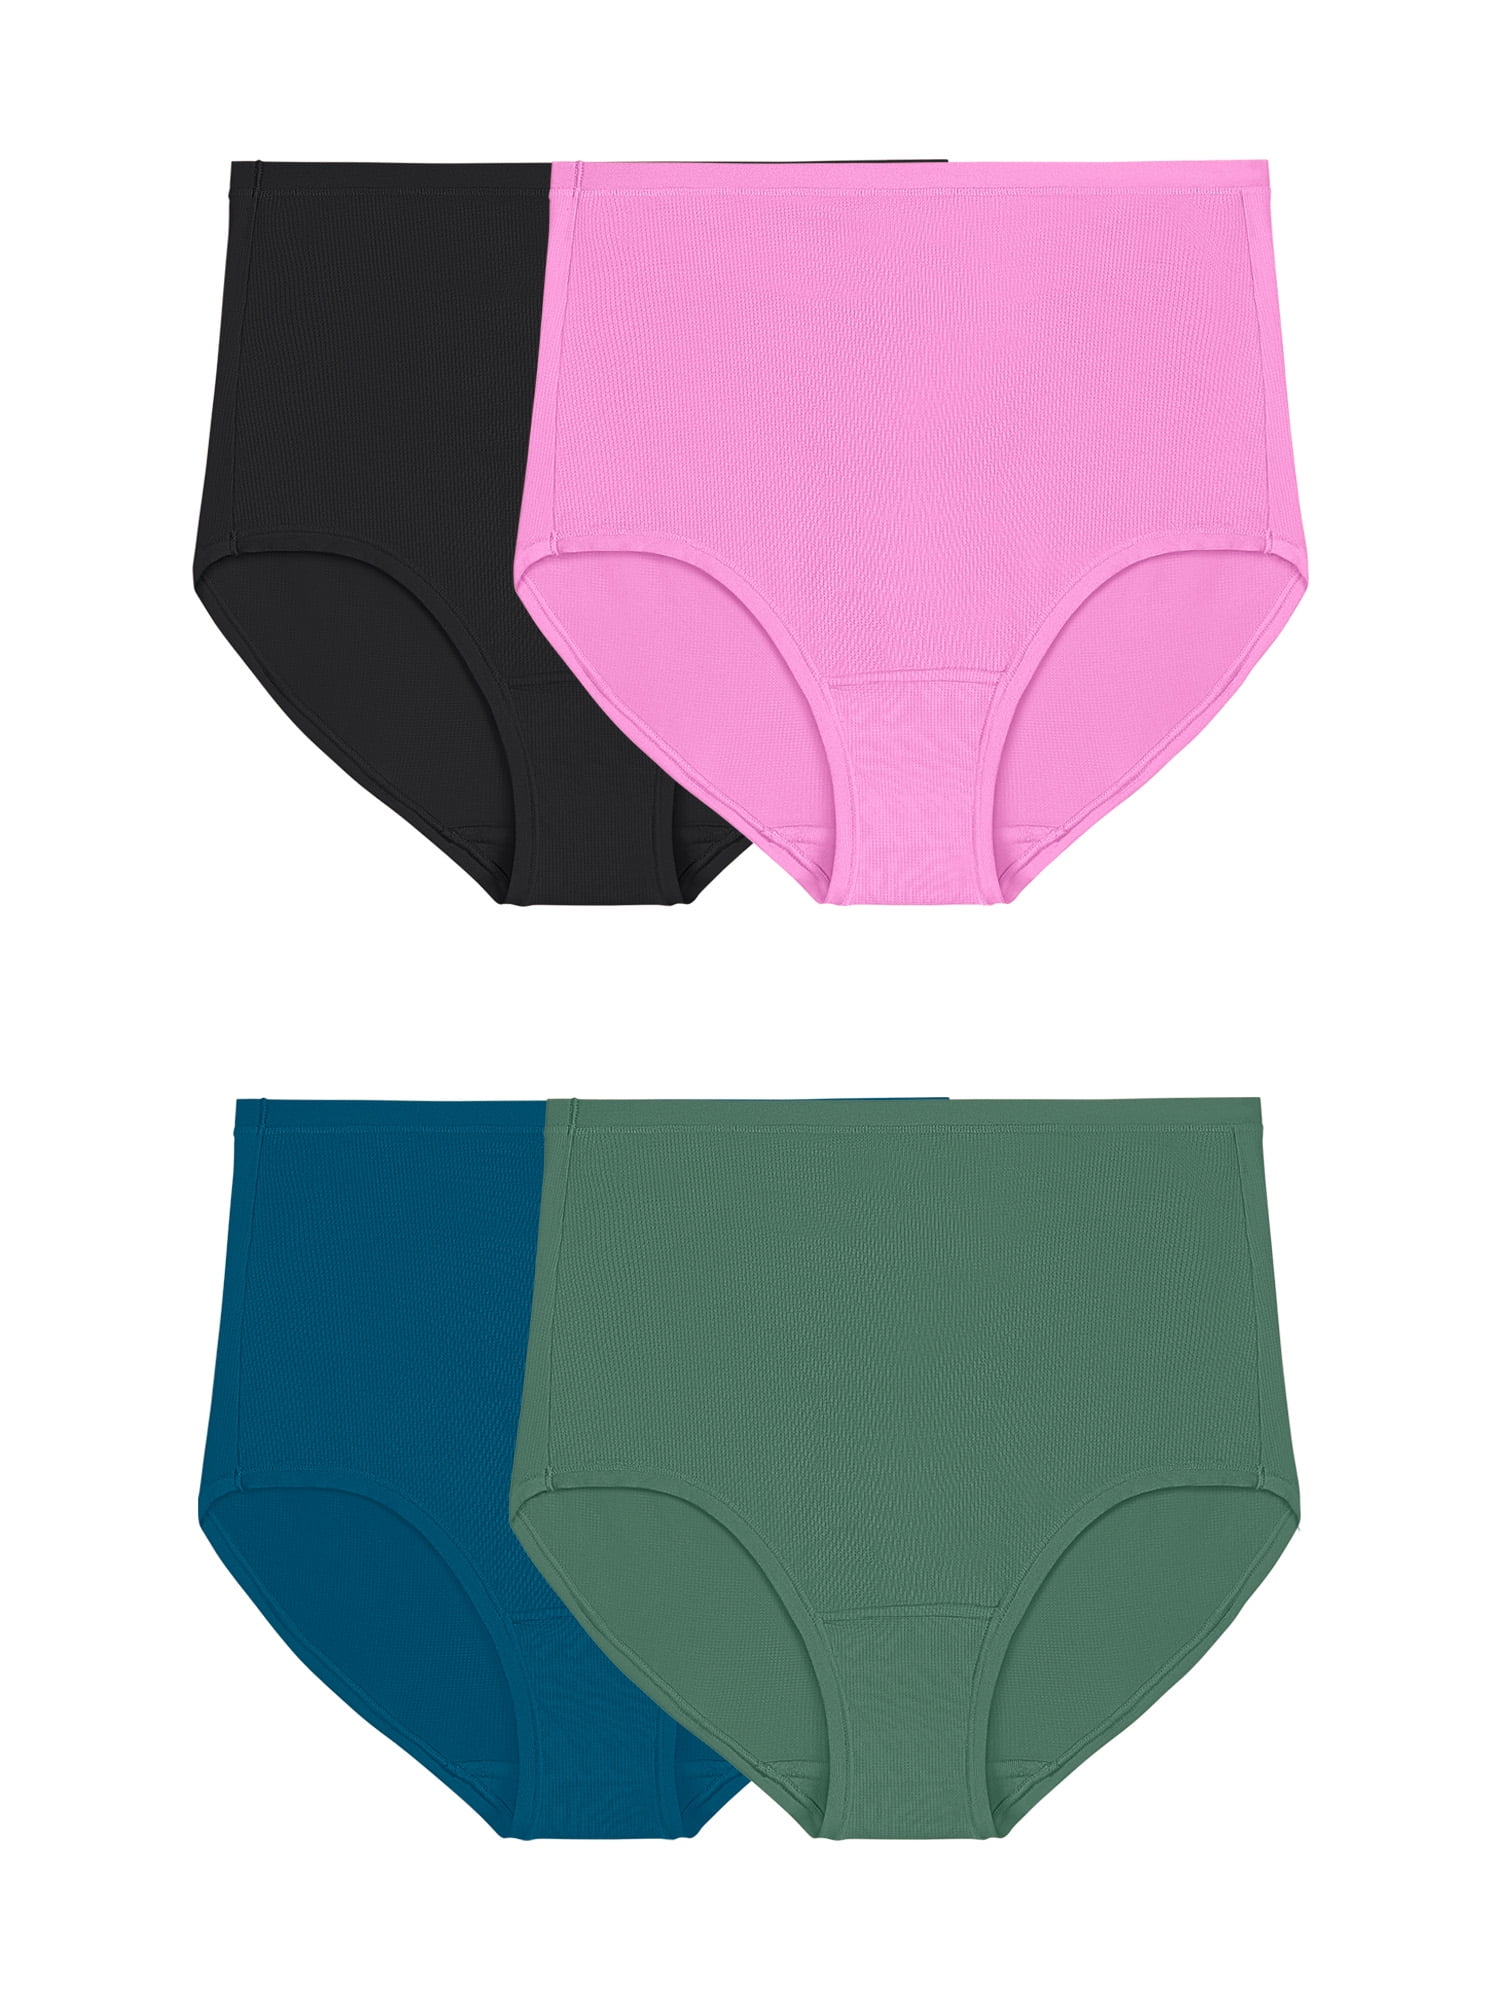 Fruit of the Loom Girls Big Cotton Brief Underwear (Discontinued) :  : Clothing, Shoes & Accessories